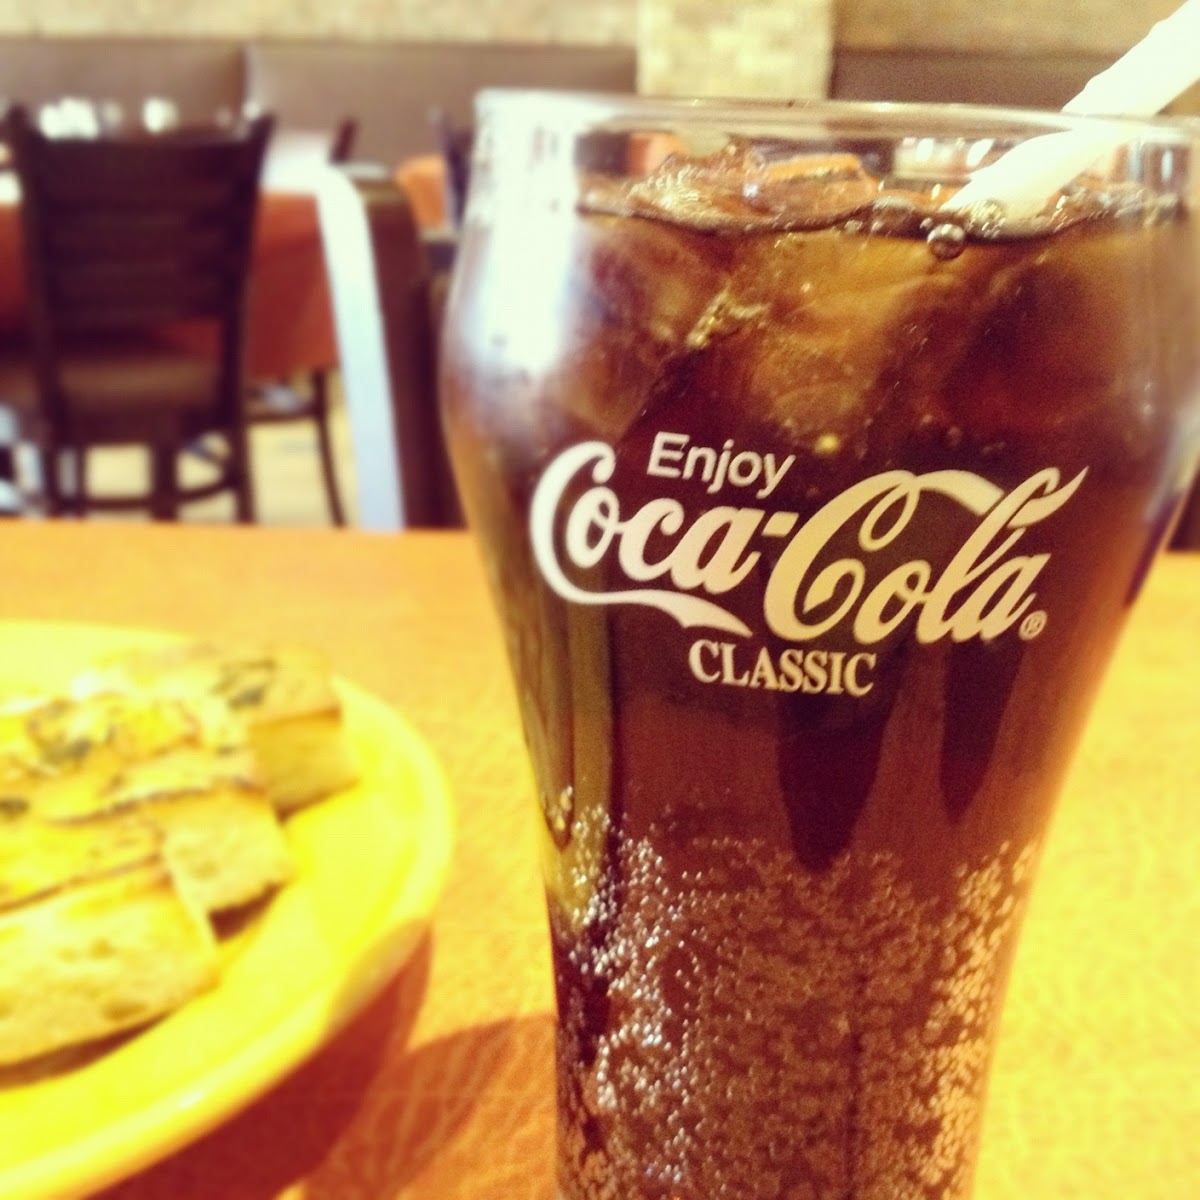 I love a good cold coke with my pizza!